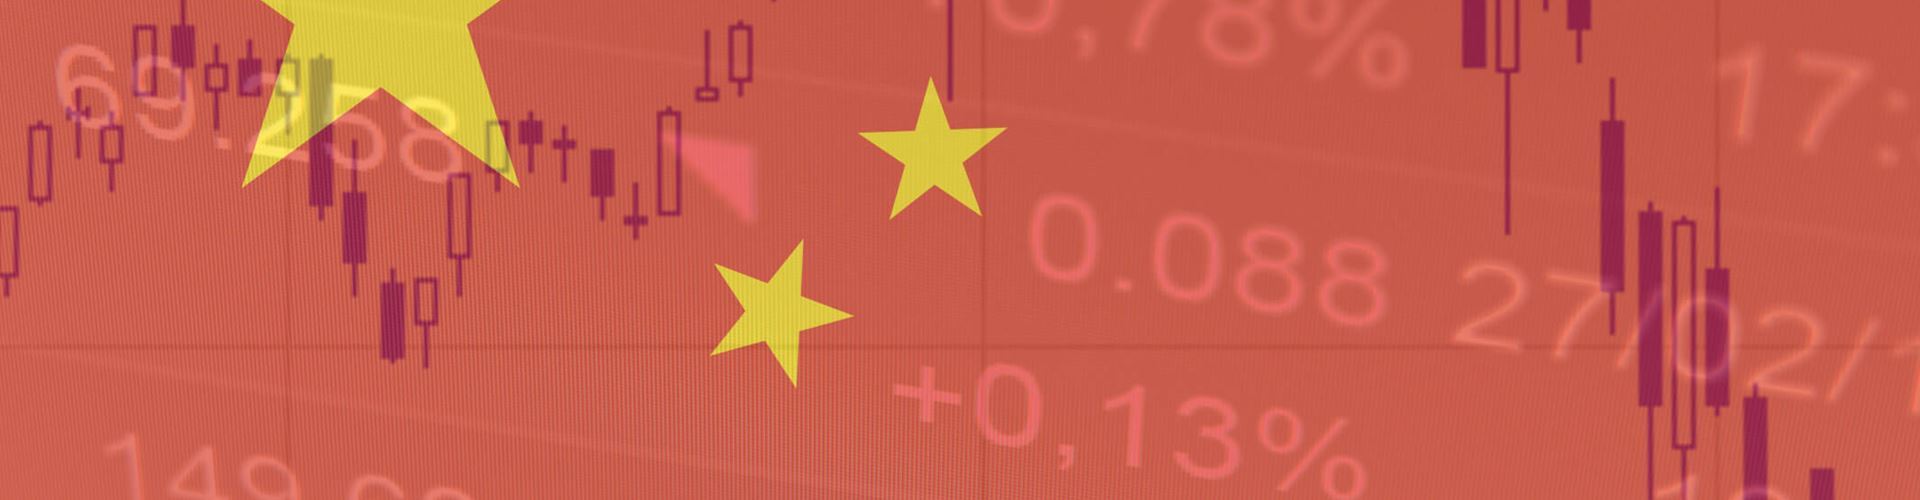 Chinese economic woes hit global shares